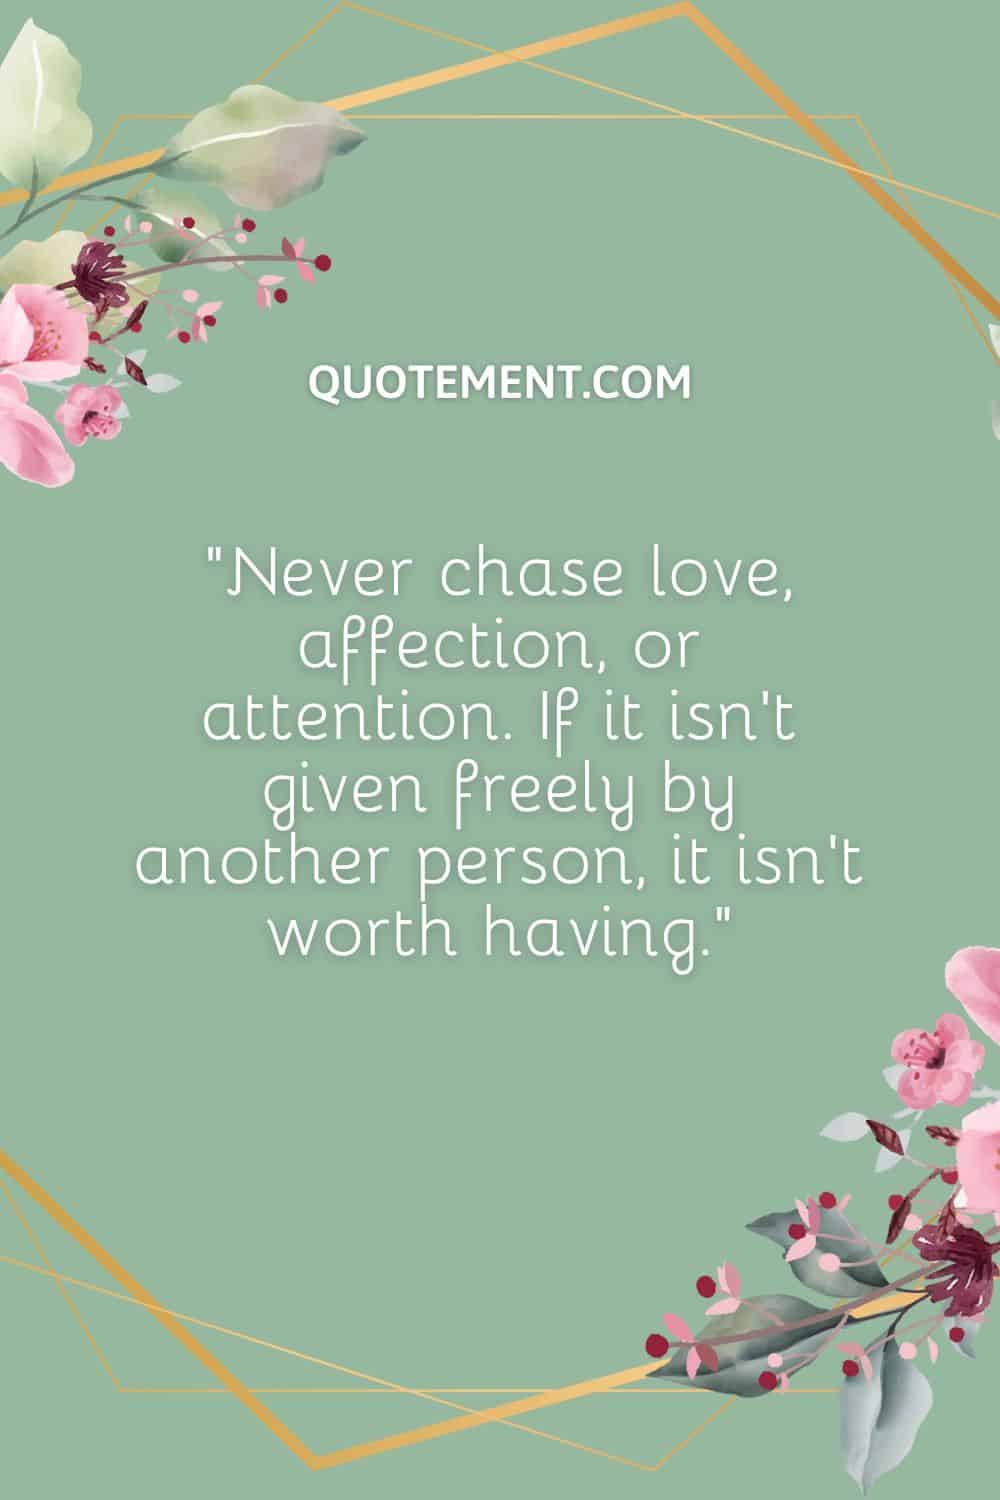 Never chase love, affection, or attention